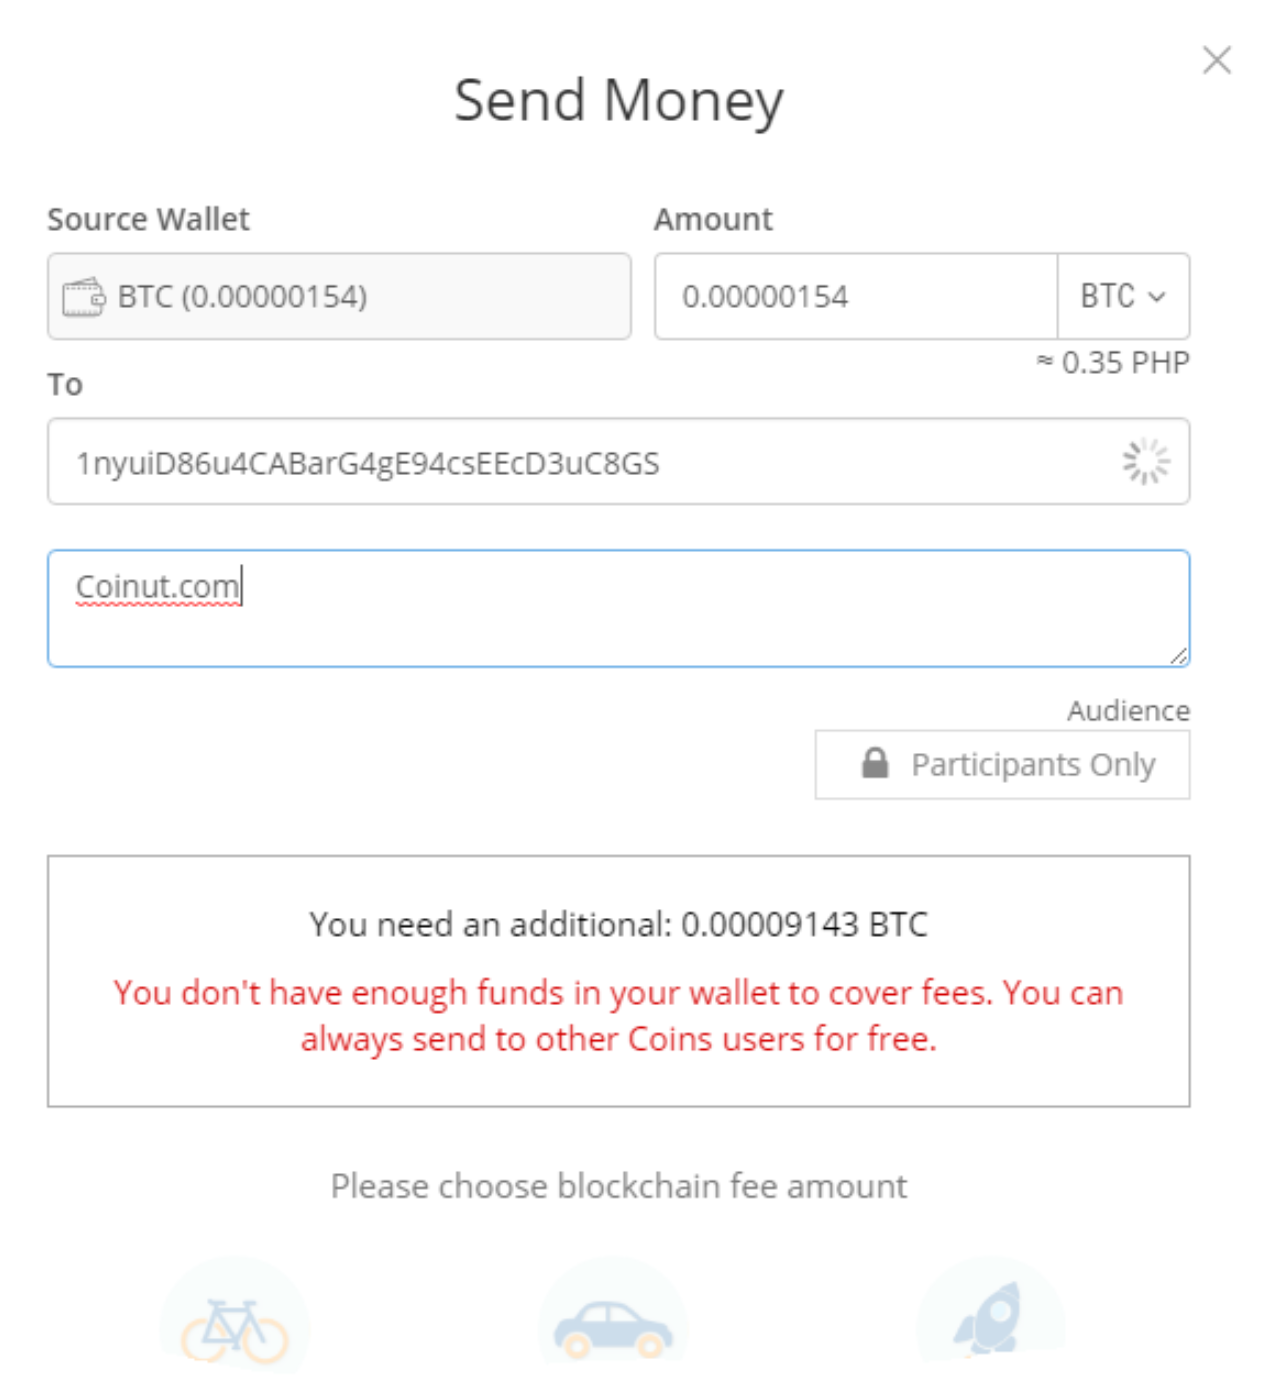 How To Transfer From Coins Ph To My Coinut Account Coinut - 